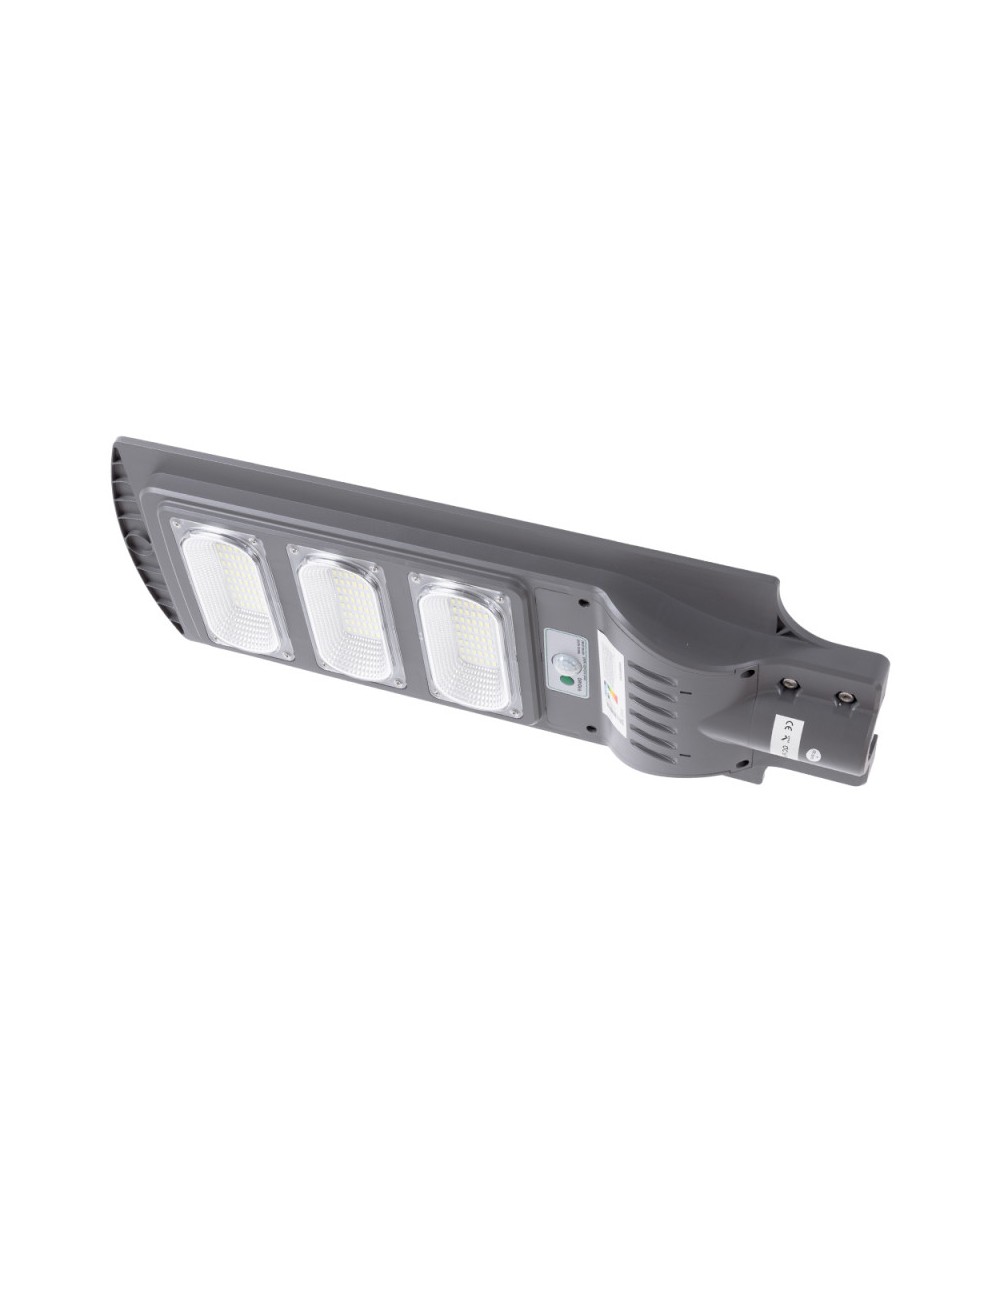 Lampadaire Led 60W 6000ºK IP65 Solaire Sensor 50.000H [RS-SLABS60W-CW]